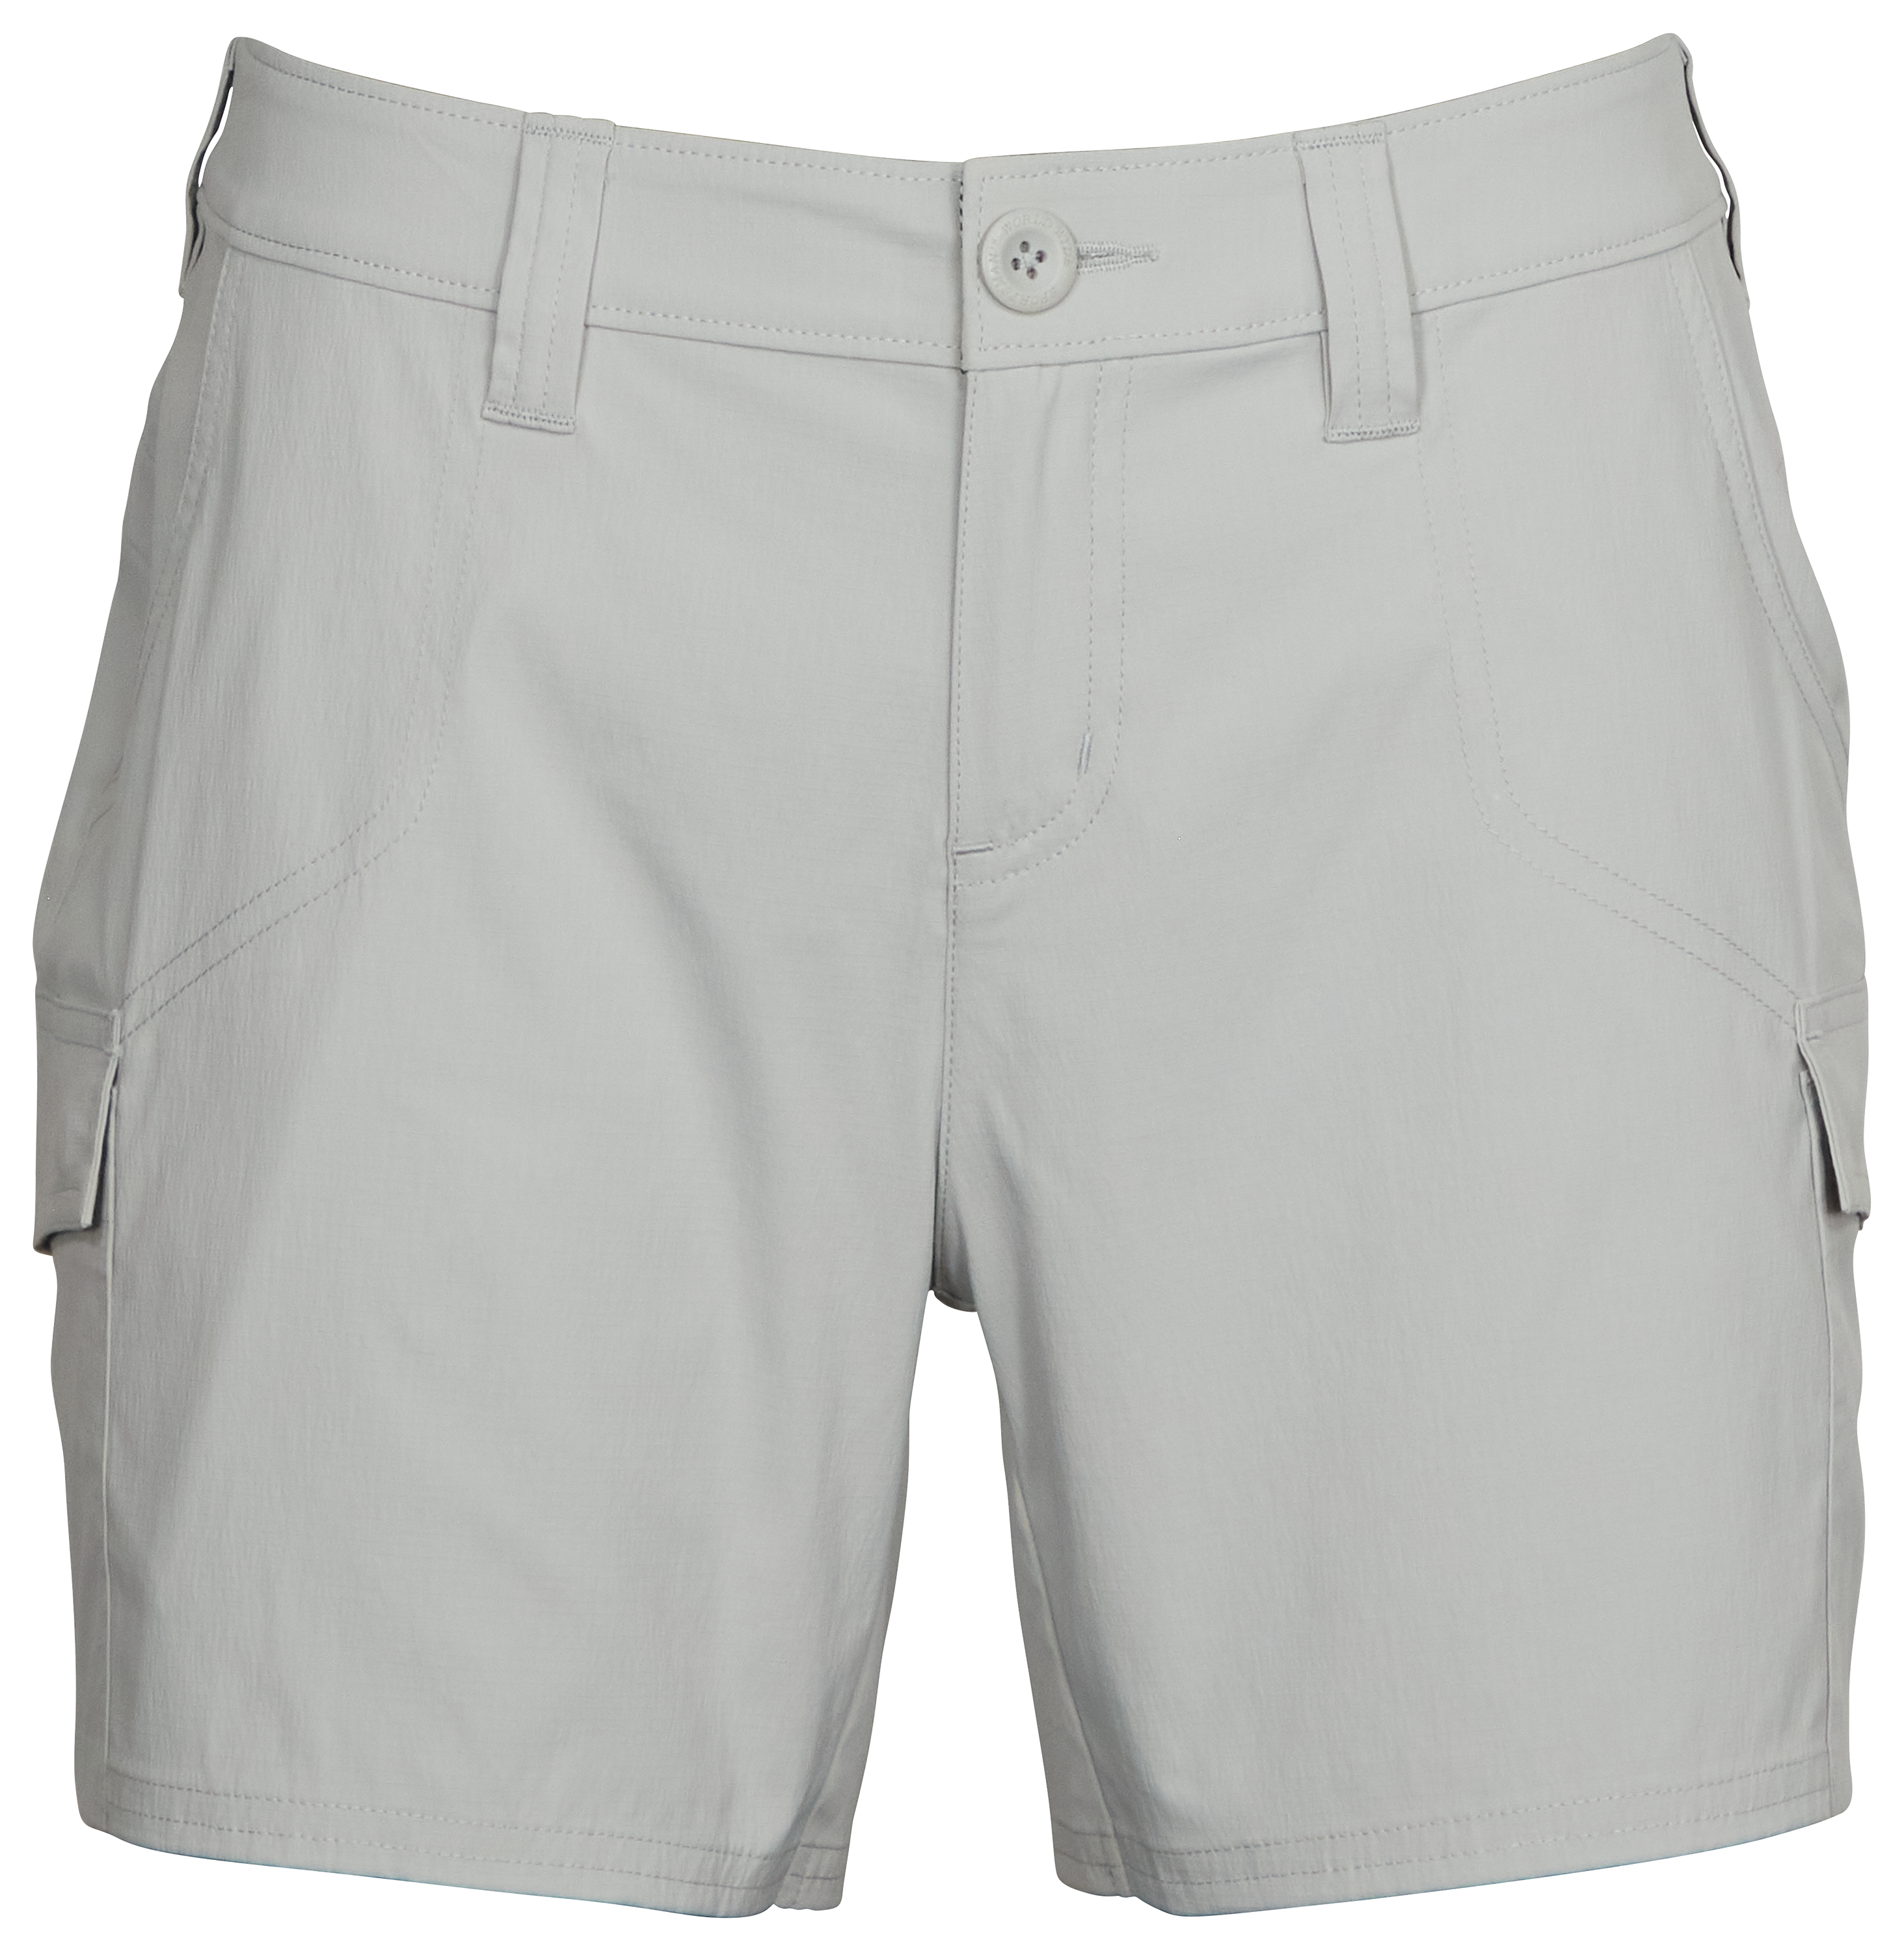 World Wide Sportsman Ripstop Cargo Shorts for Ladies - High Rise - 12